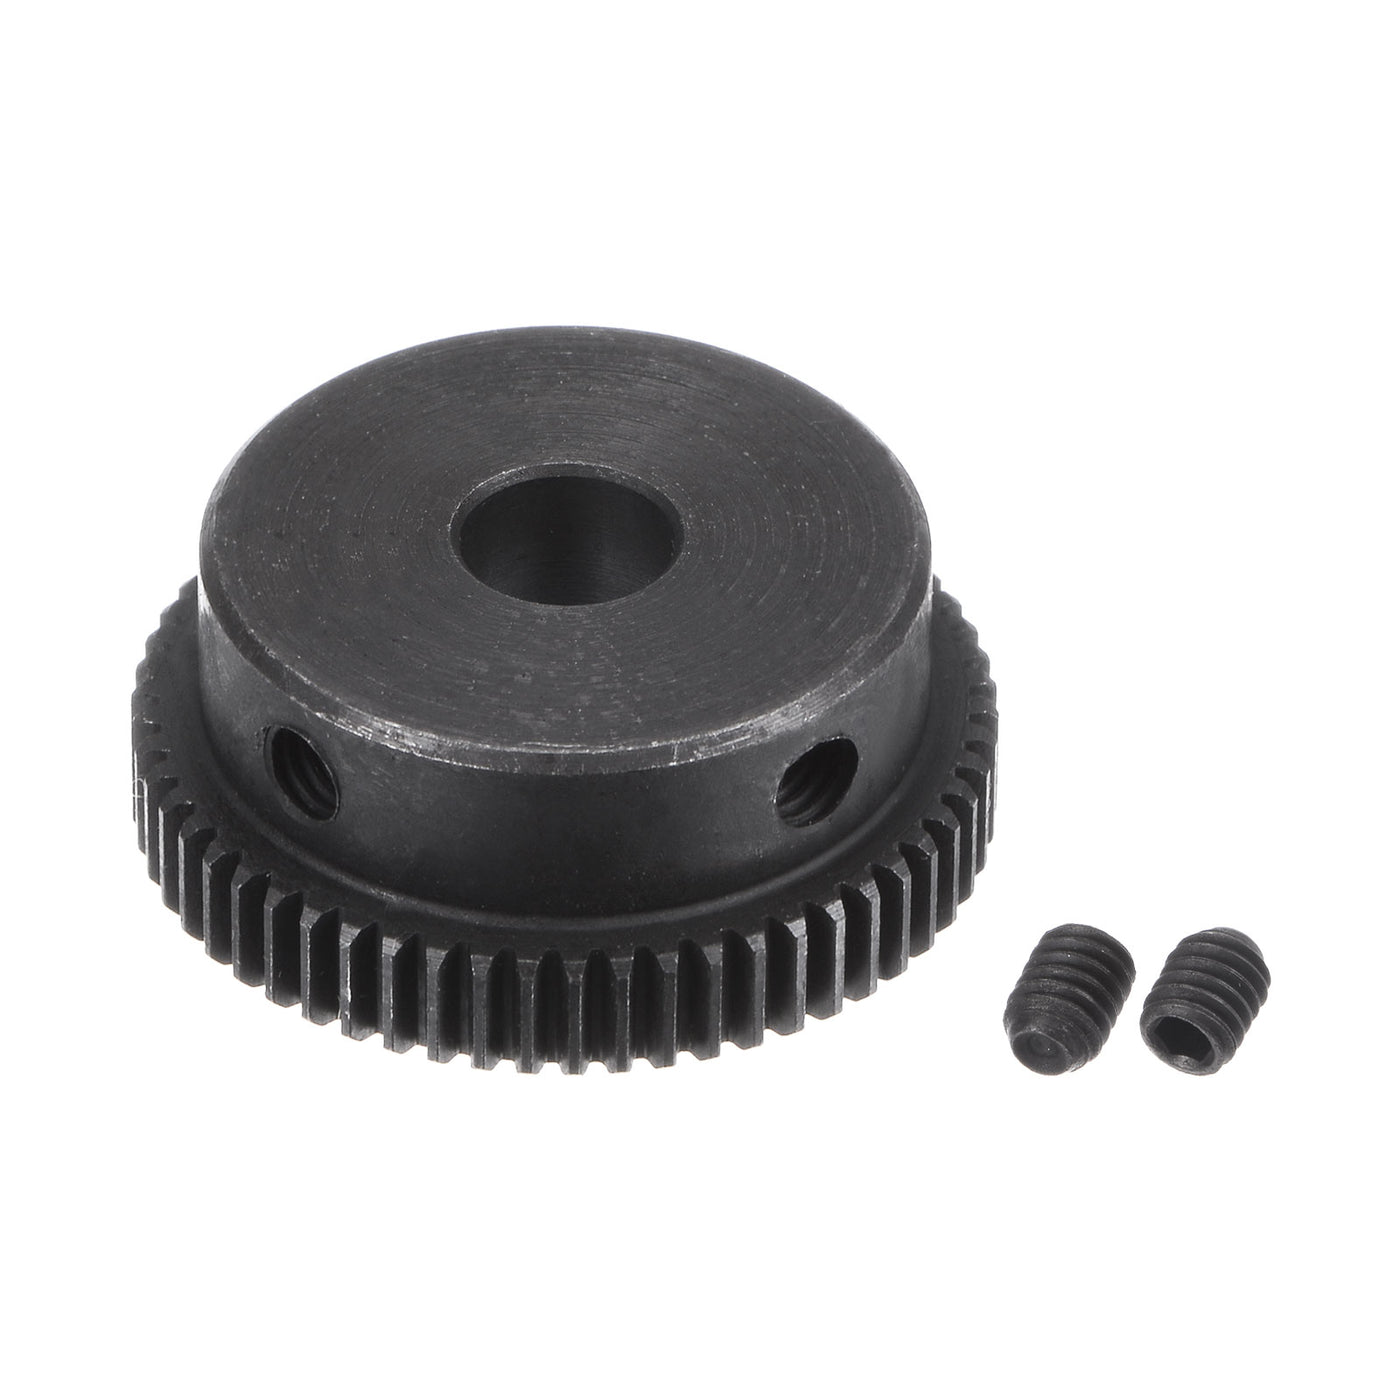 uxcell Uxcell 0.5 Mod 58T 6mm Bore 30mm Outer Dia 45# Carbon Steel Motor Pinion Gear Set